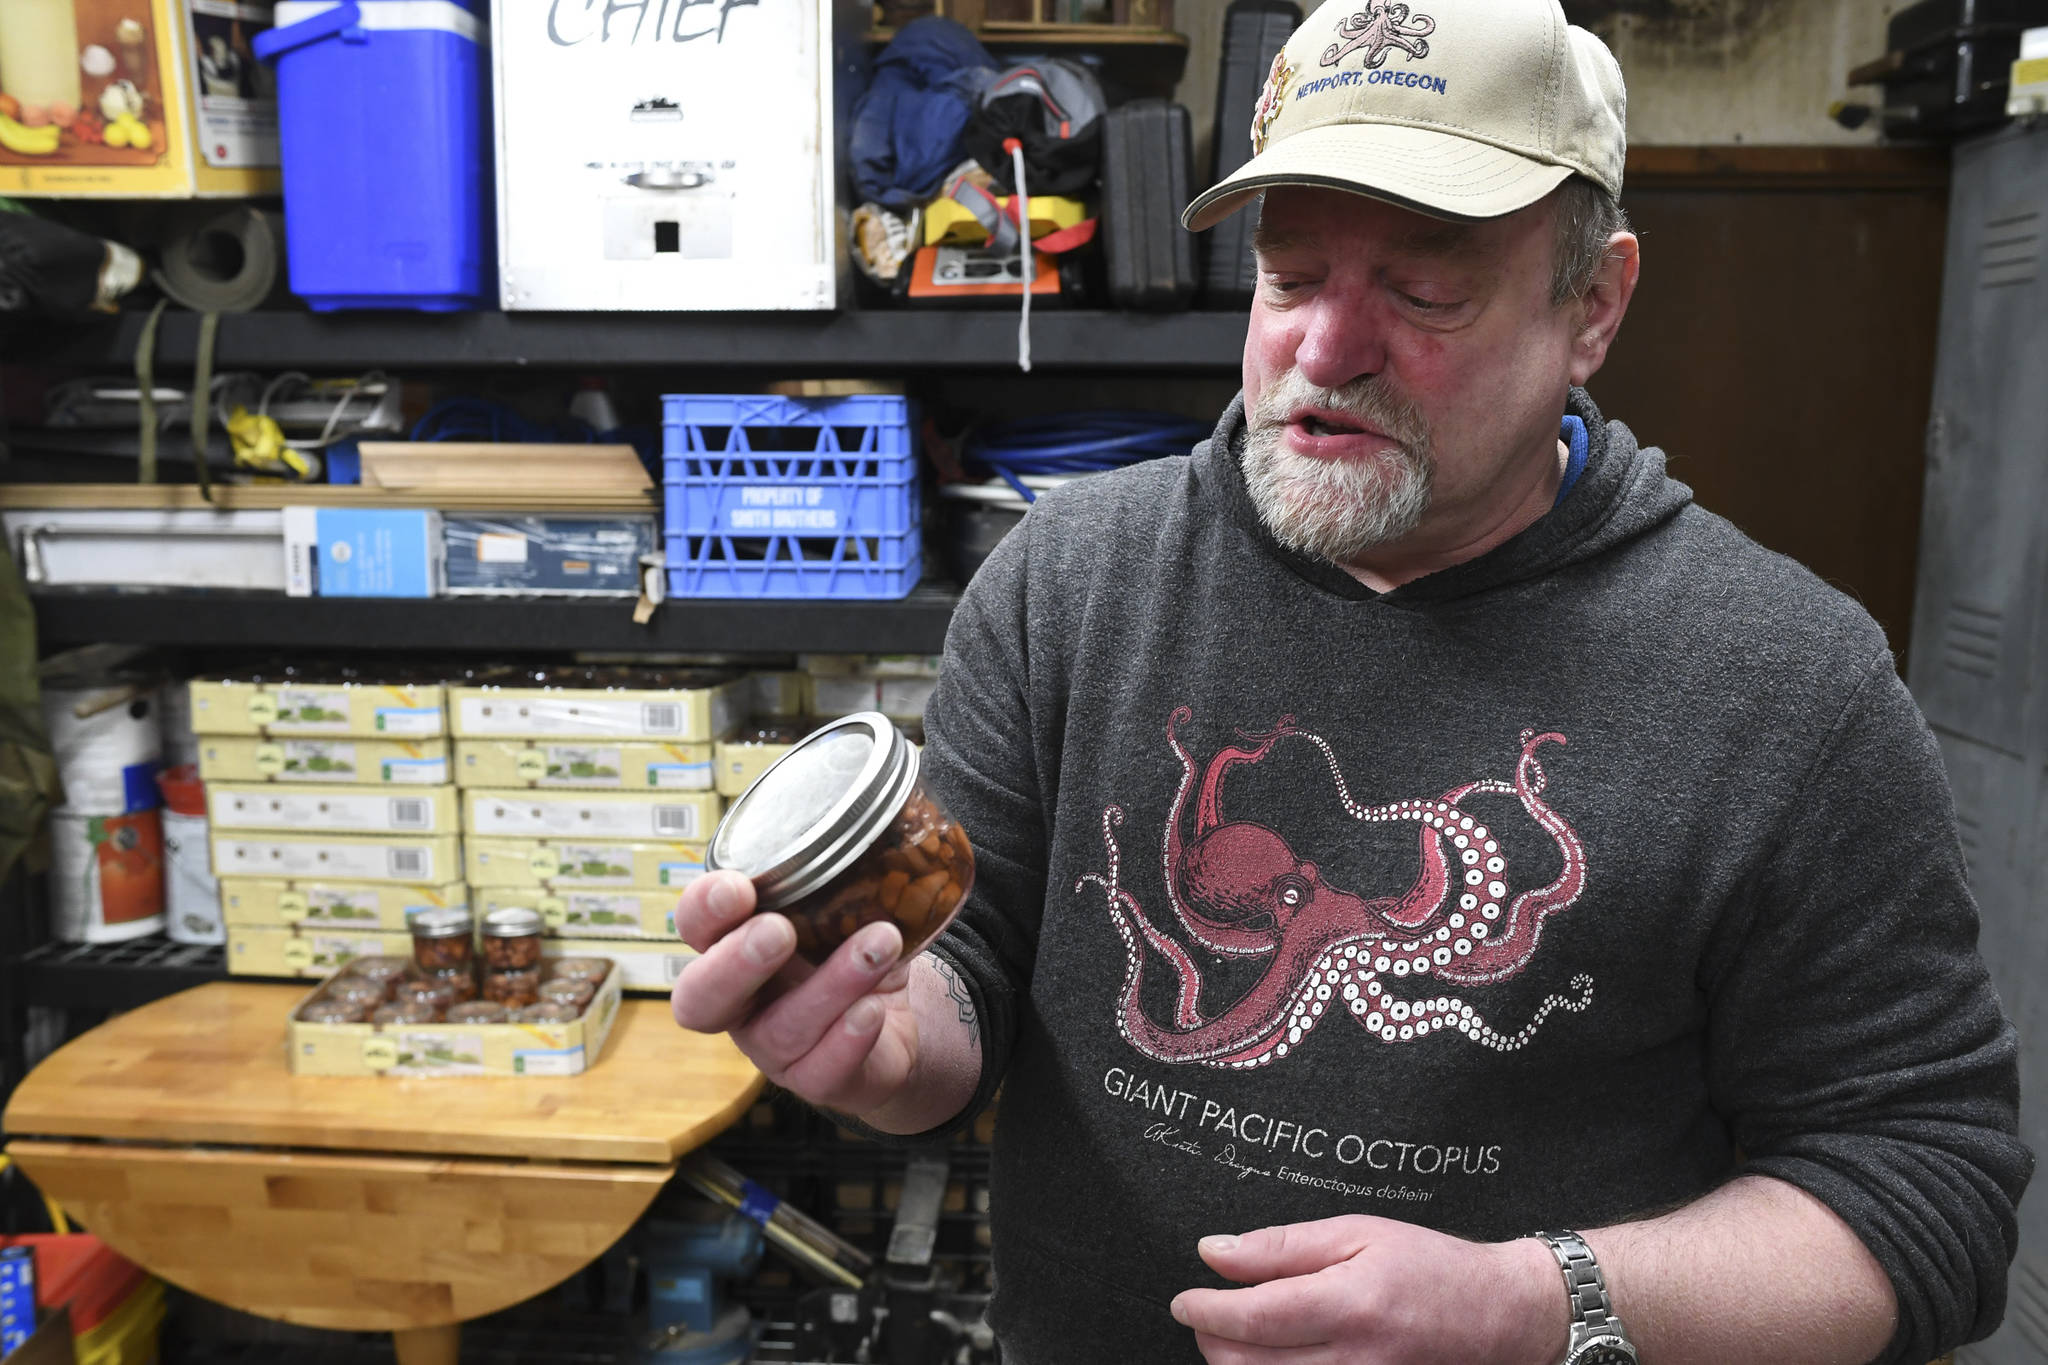 Rik Pruett talks about his work to bring smoked octopus to market at his Mendenhall Valley home on Friday, April 26, 2019. Pruitt said it has been a dream come true and something he has been working on for over 25 years. (Michael Penn | Juneau Empire)